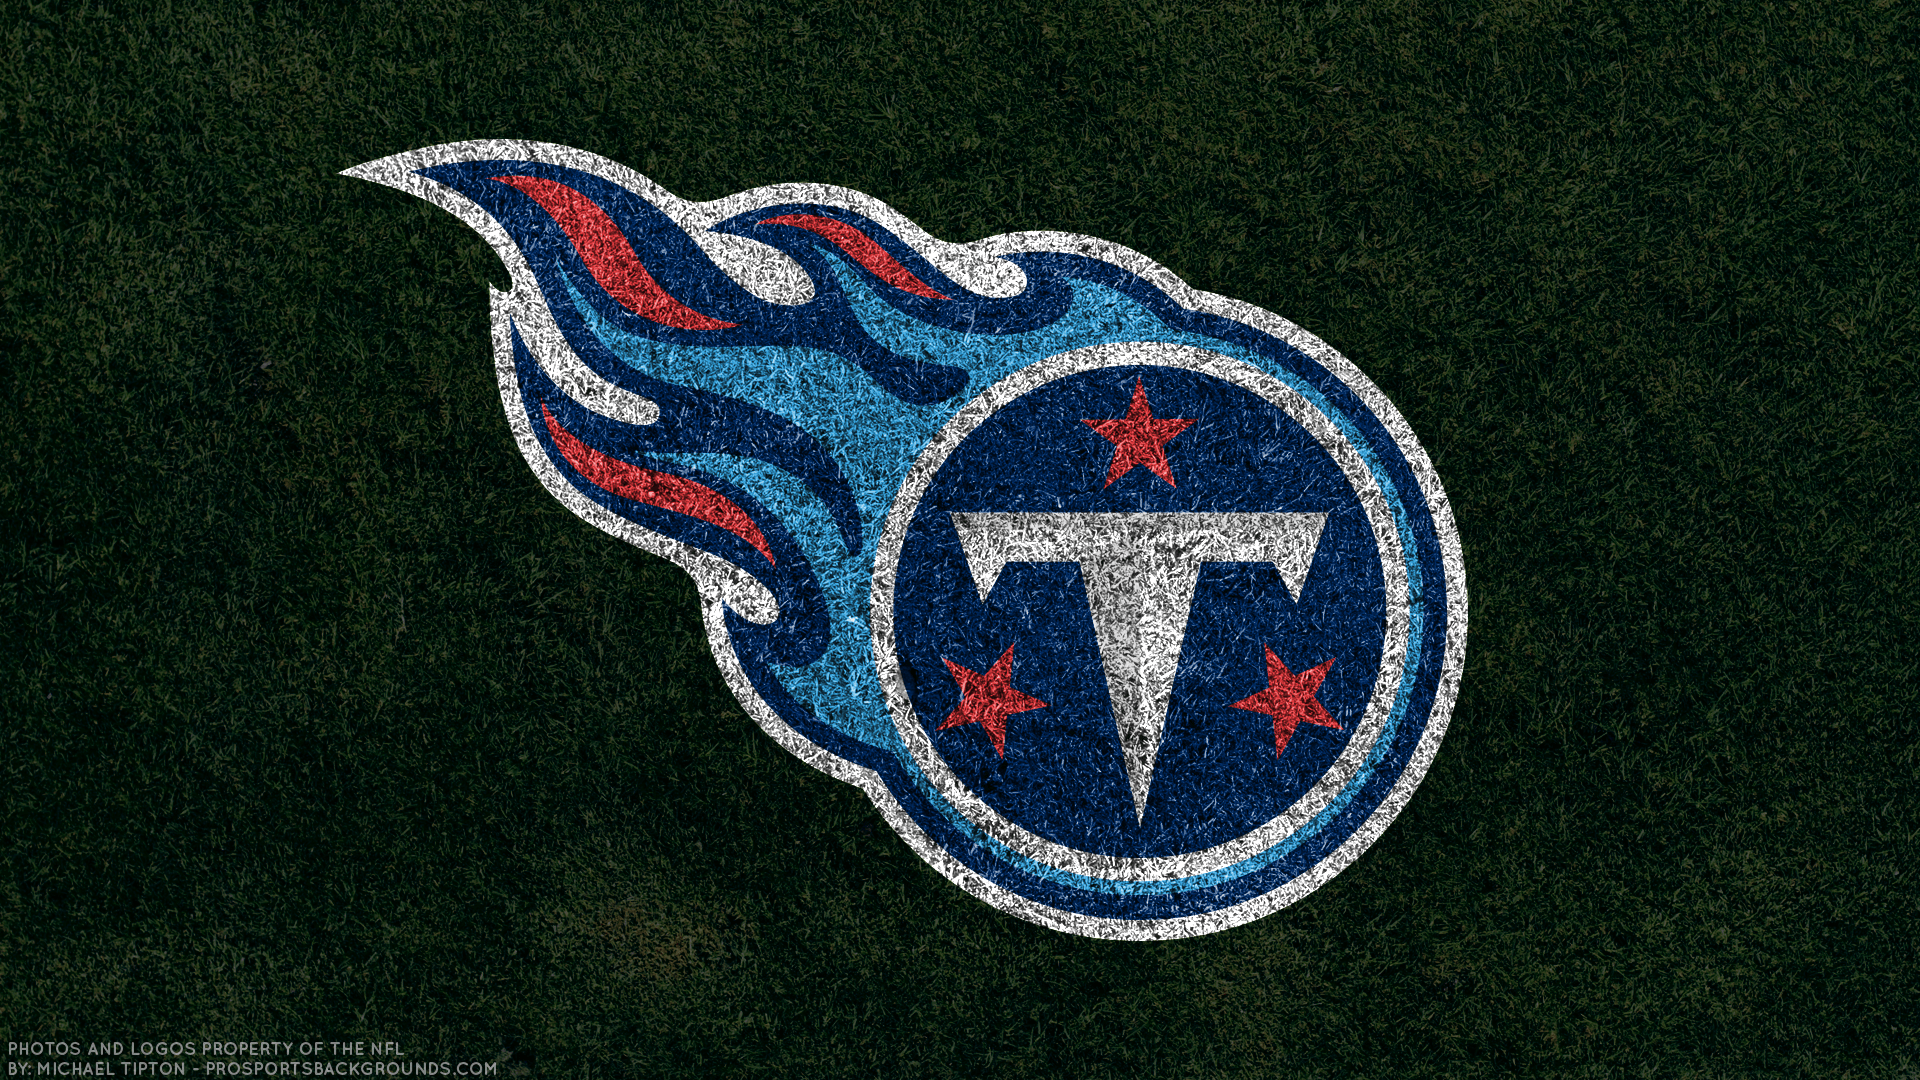 Tennessee Titans Wallpaper. iPhone. Android